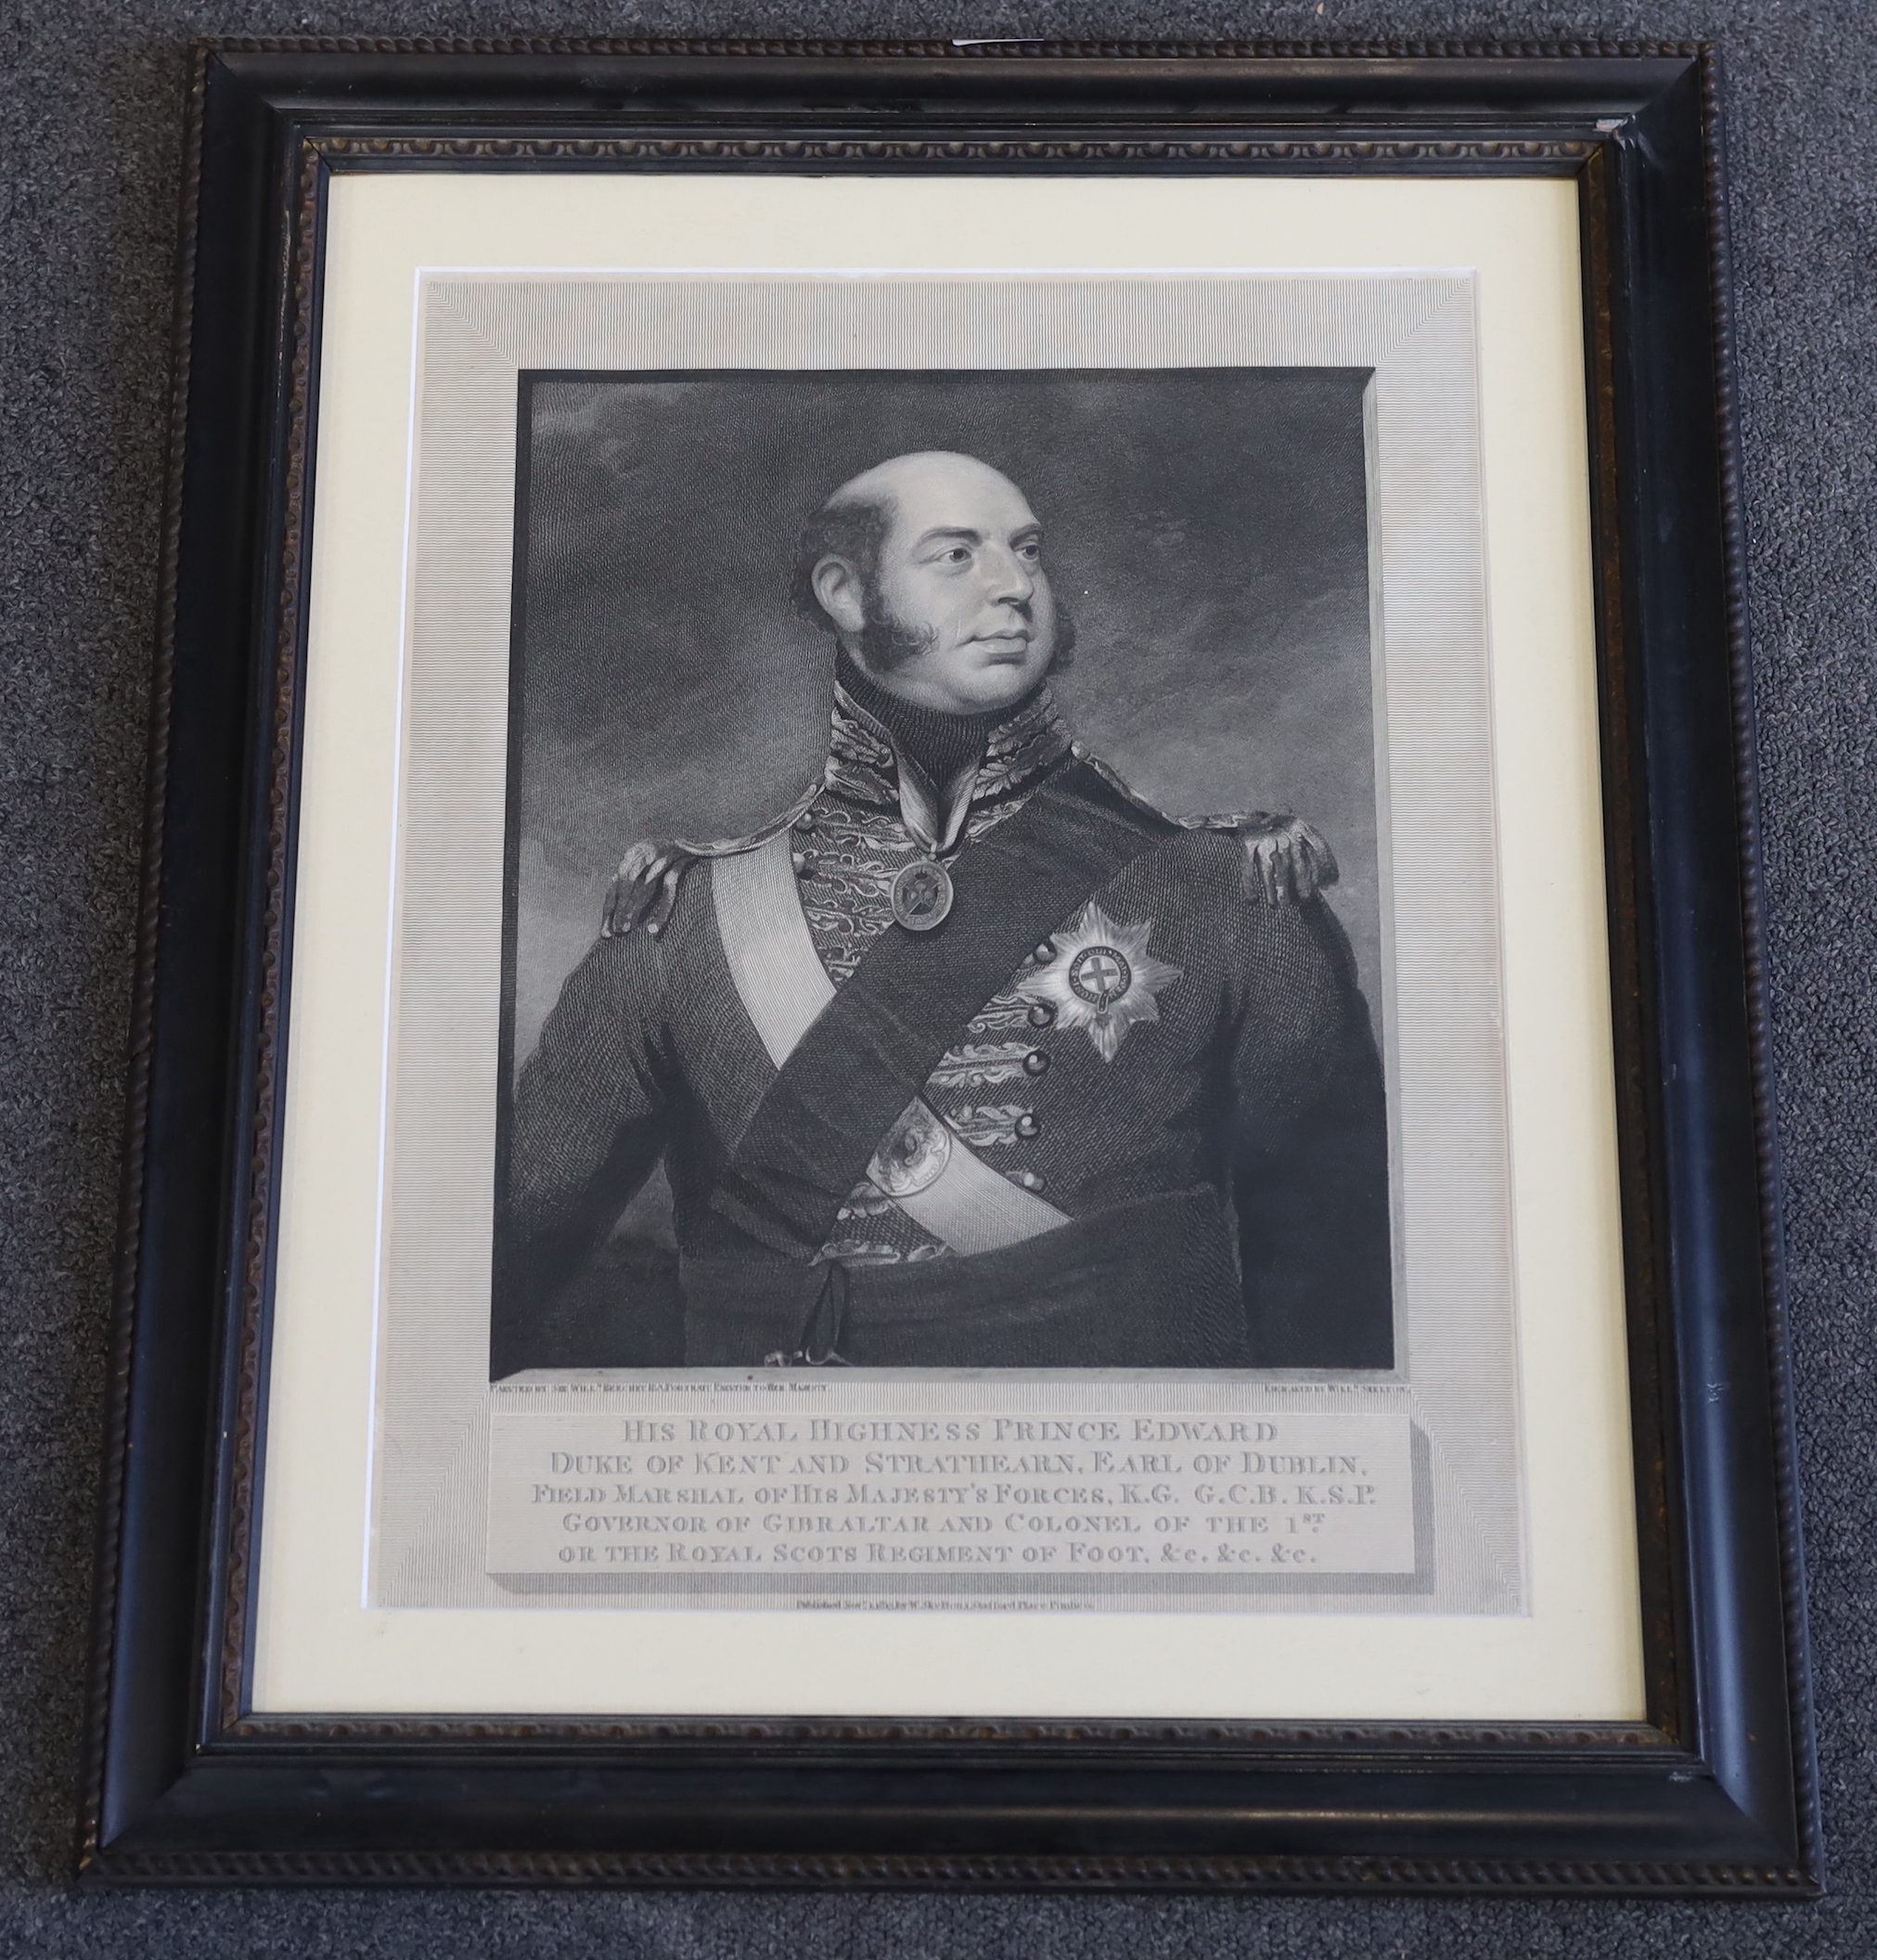 William Skelton after Sir William Beechey, engraving, 'His Royal Highness Prince Edward Duke of Kent and Strathearn..', published by Skelton 1815, visible sheet 45.5 x 35.5cm